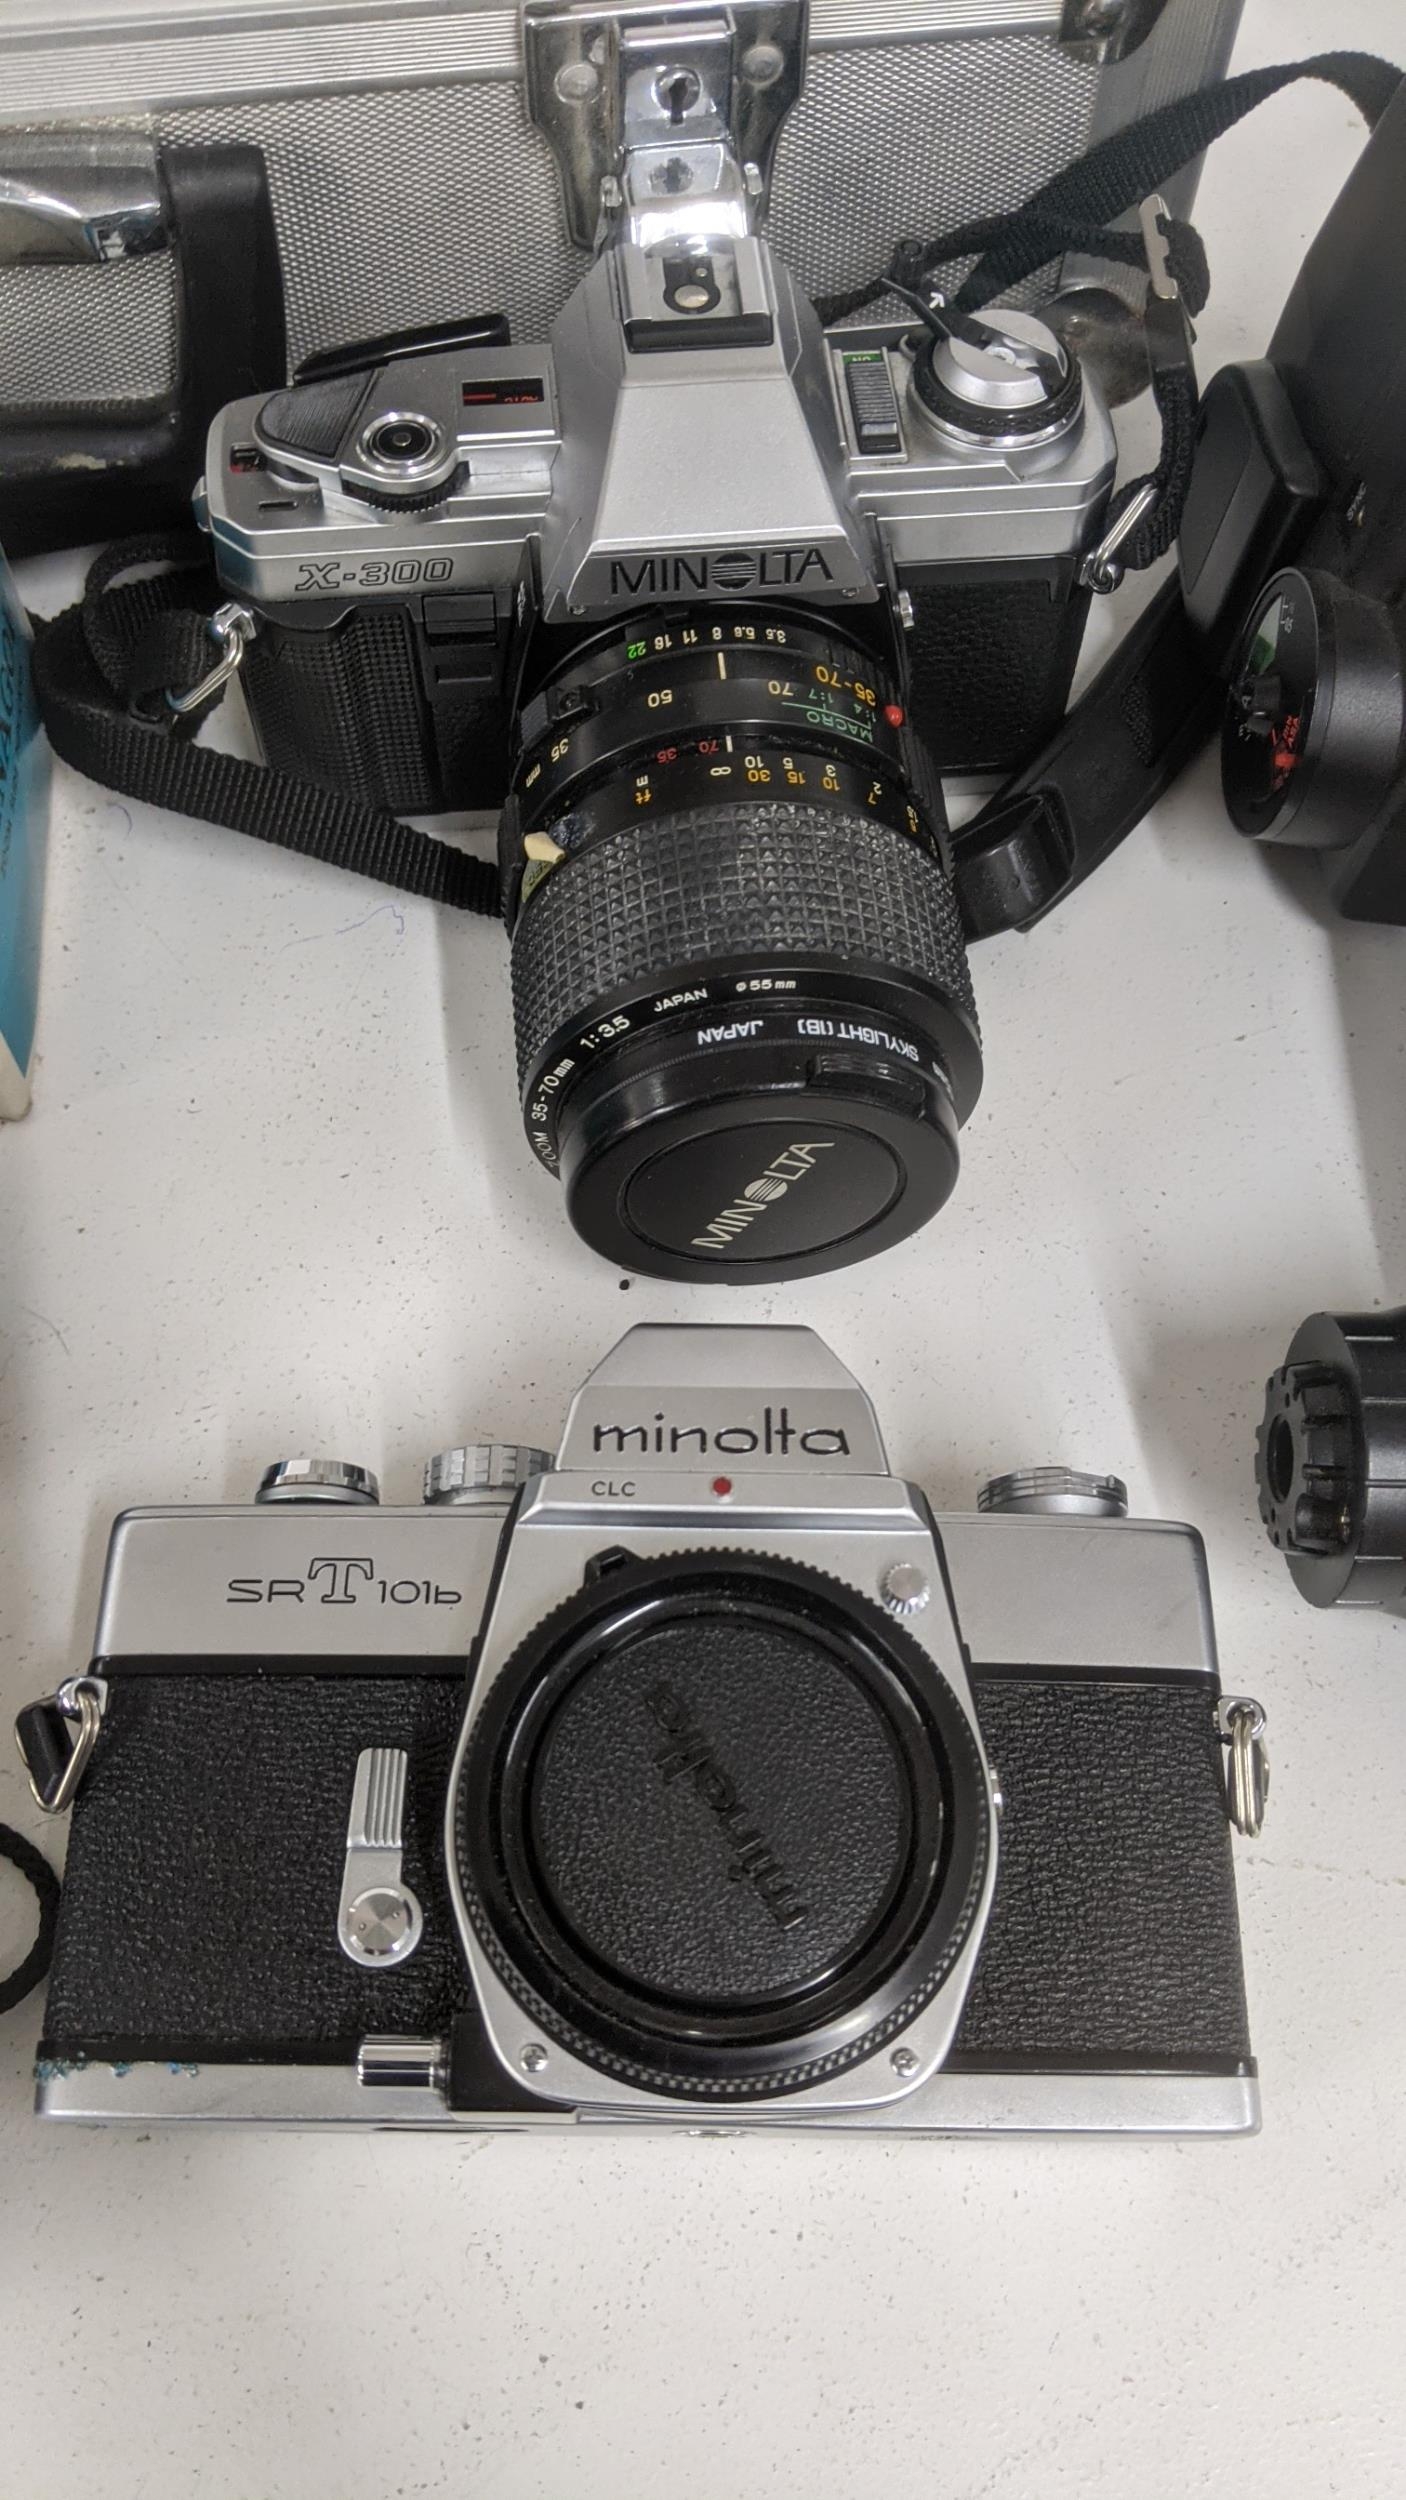 A collection of cameras and camera equipment to include a Minolta X-300 and XGI, SRT101b and - Image 2 of 6